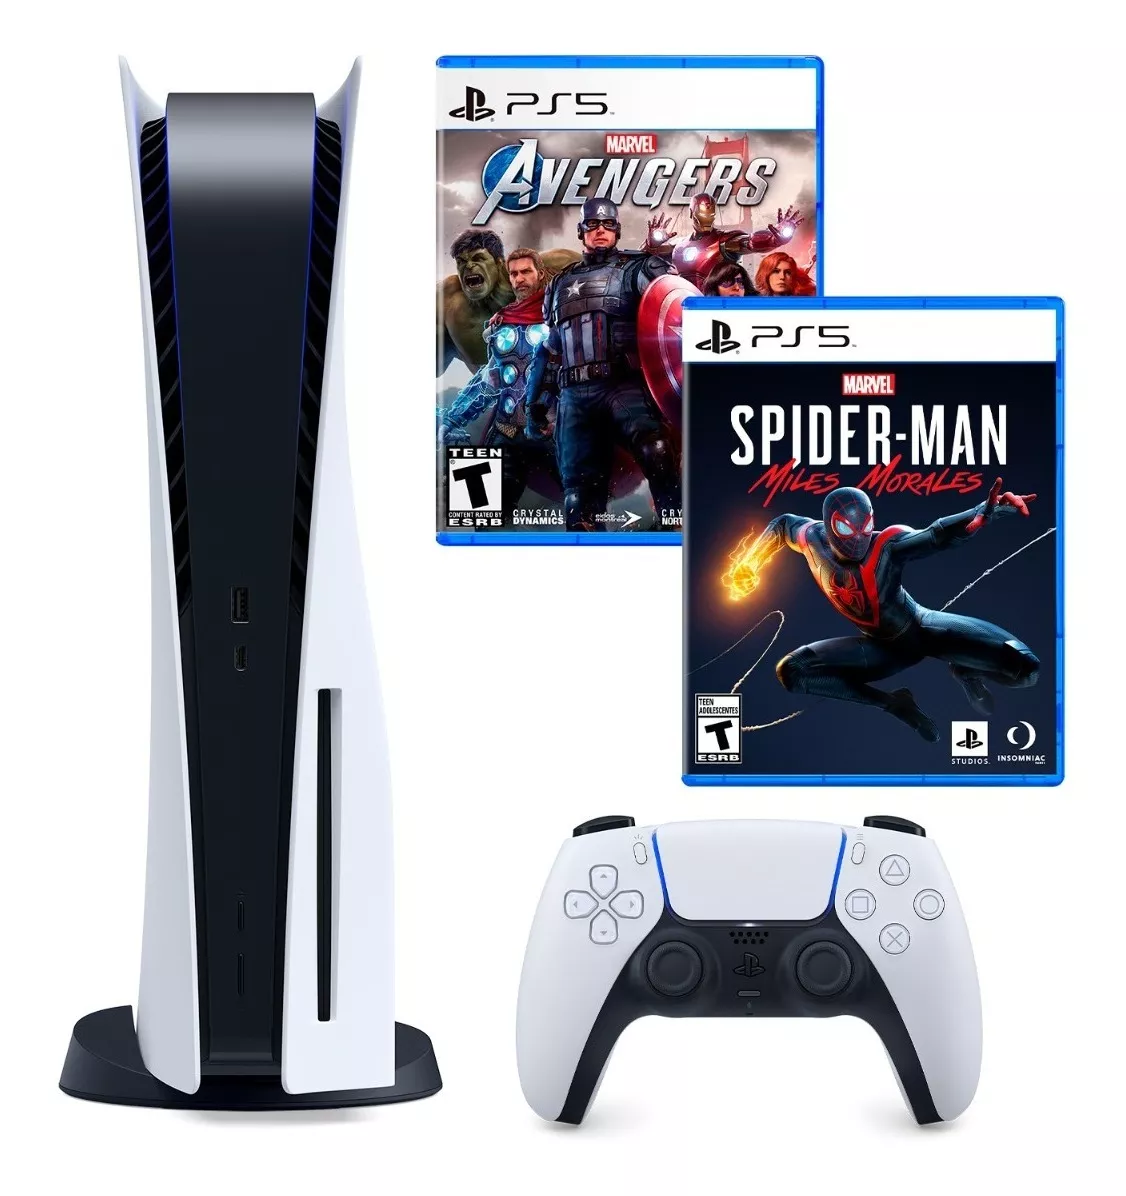 Consola Ps5 Con Lector + Marvel Avengers + Spiderman Morales